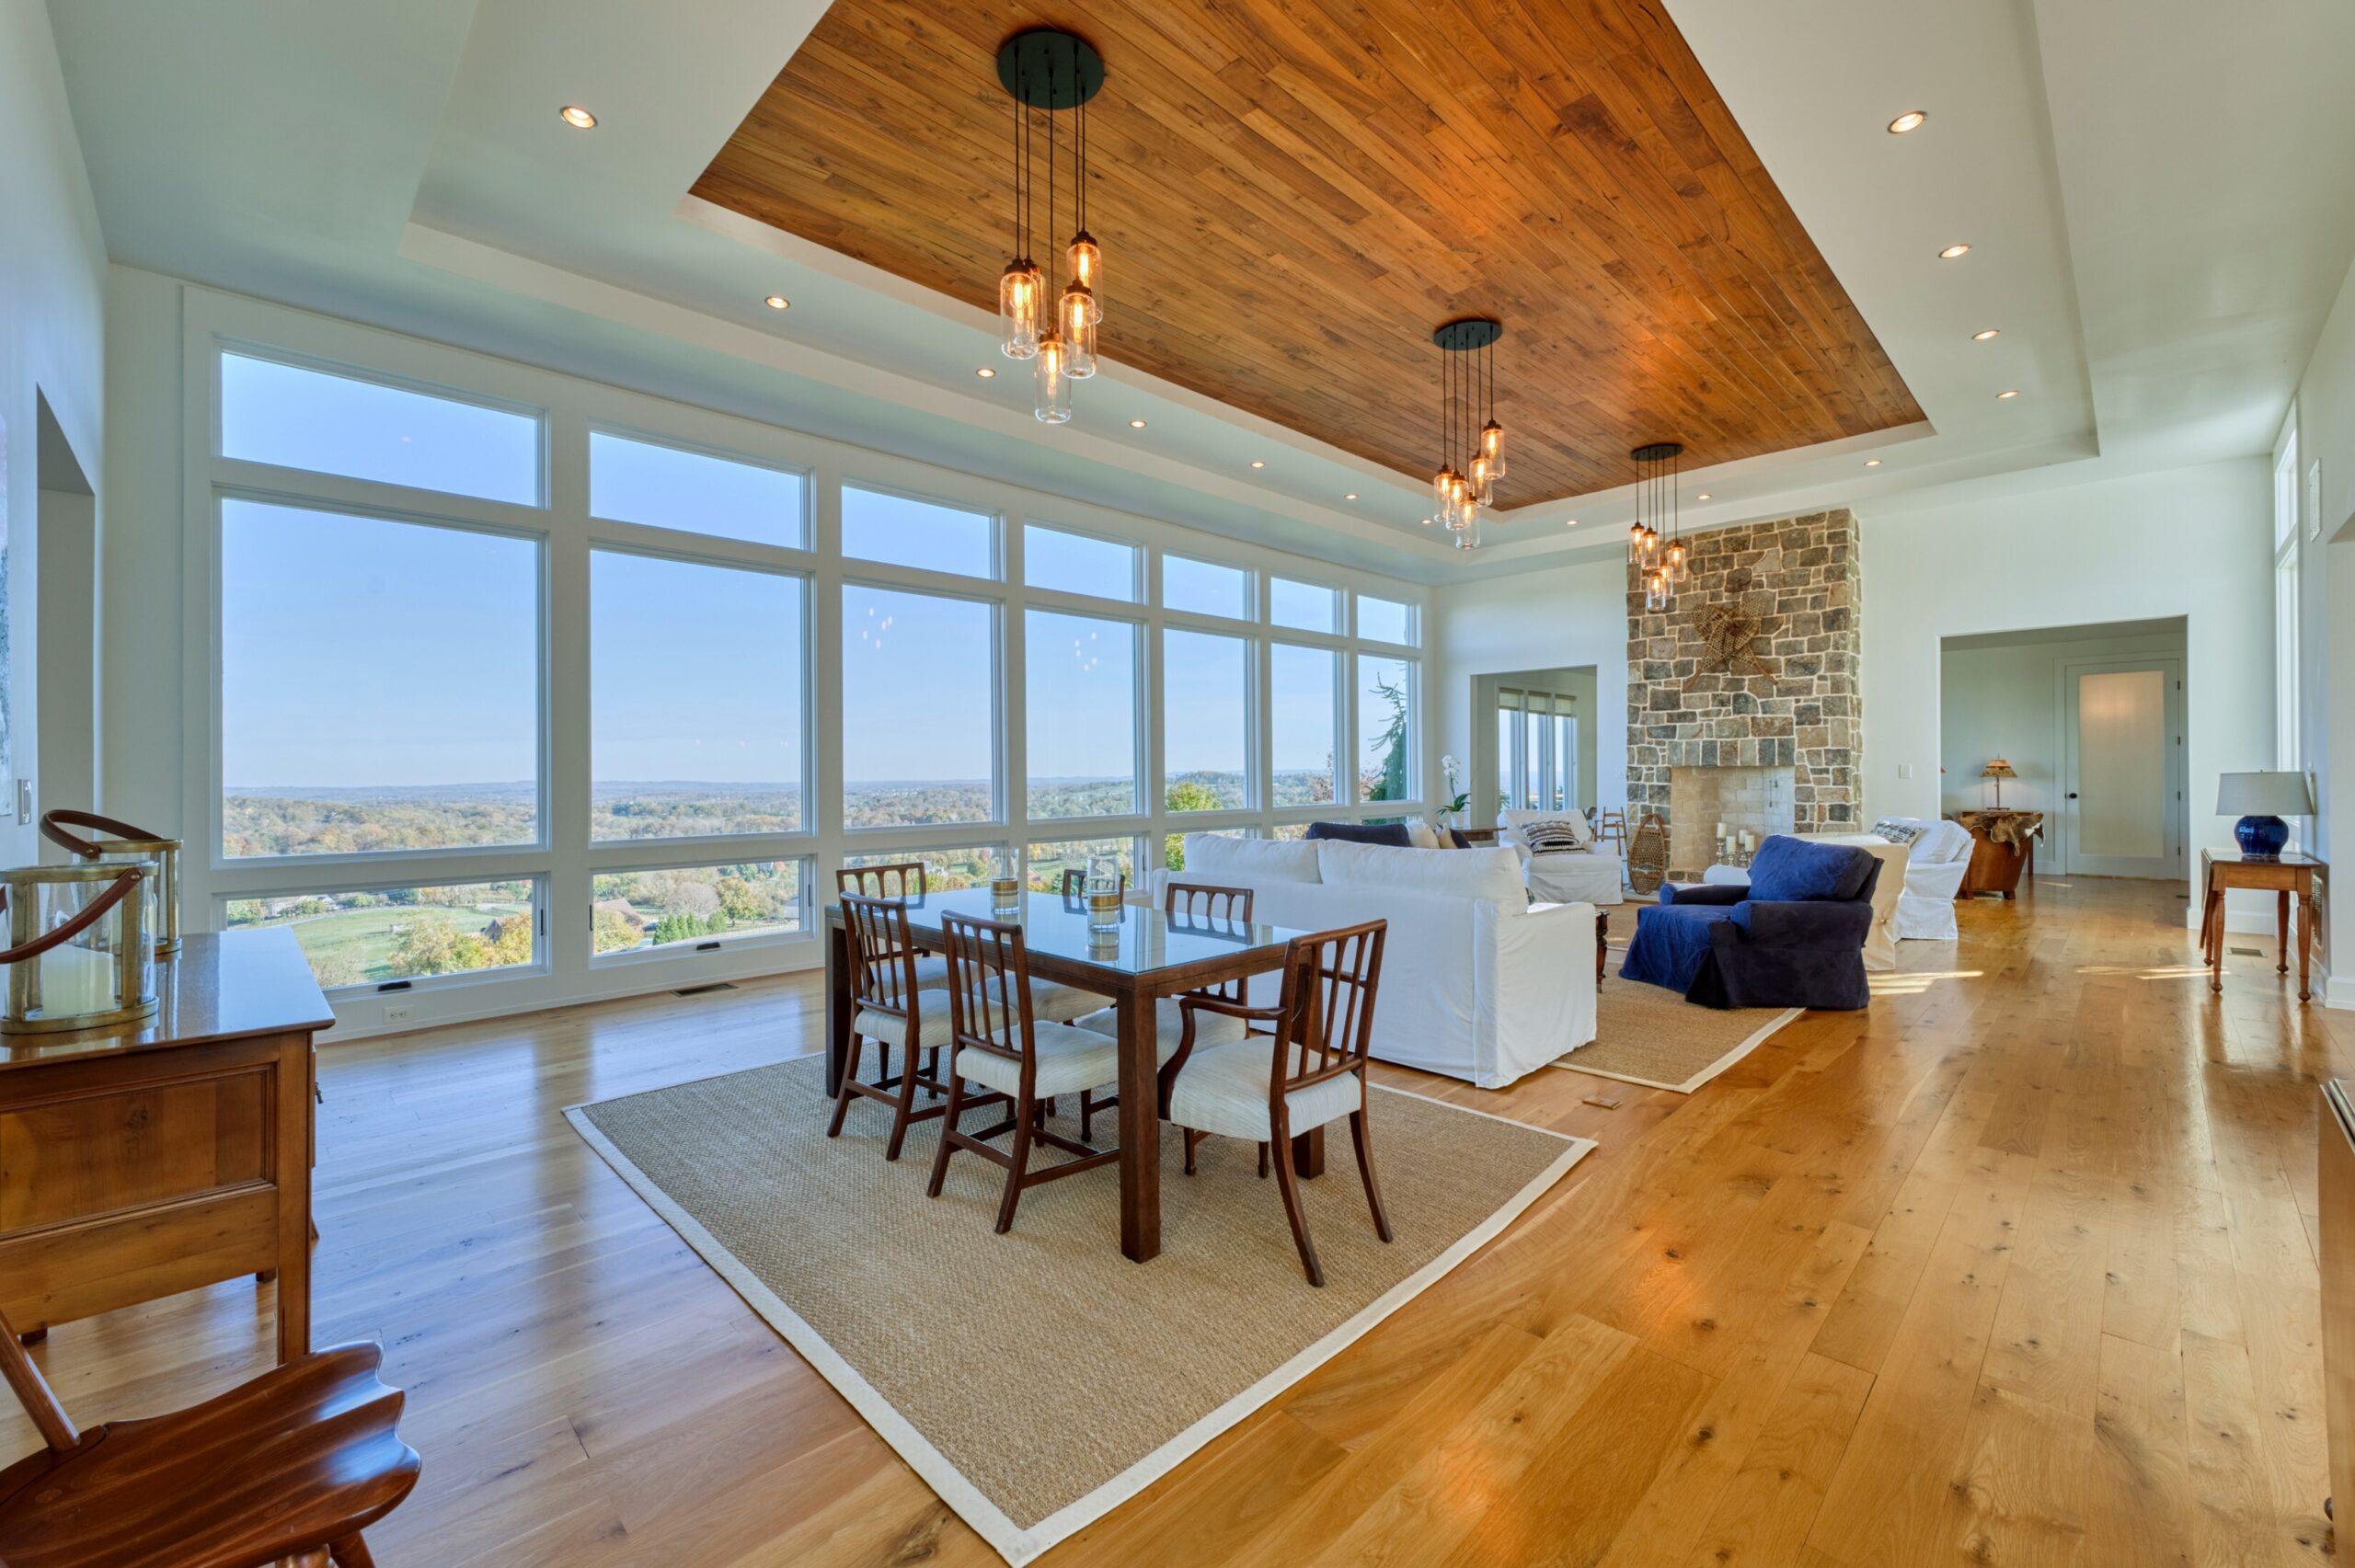 Professional interior photo of 17151 Brookdale Ln in Round Hill, VA - showing the great room with fireplace, recessed hardwood panel on the ceiling, hardwood floors, and large windows on either side to take in the views